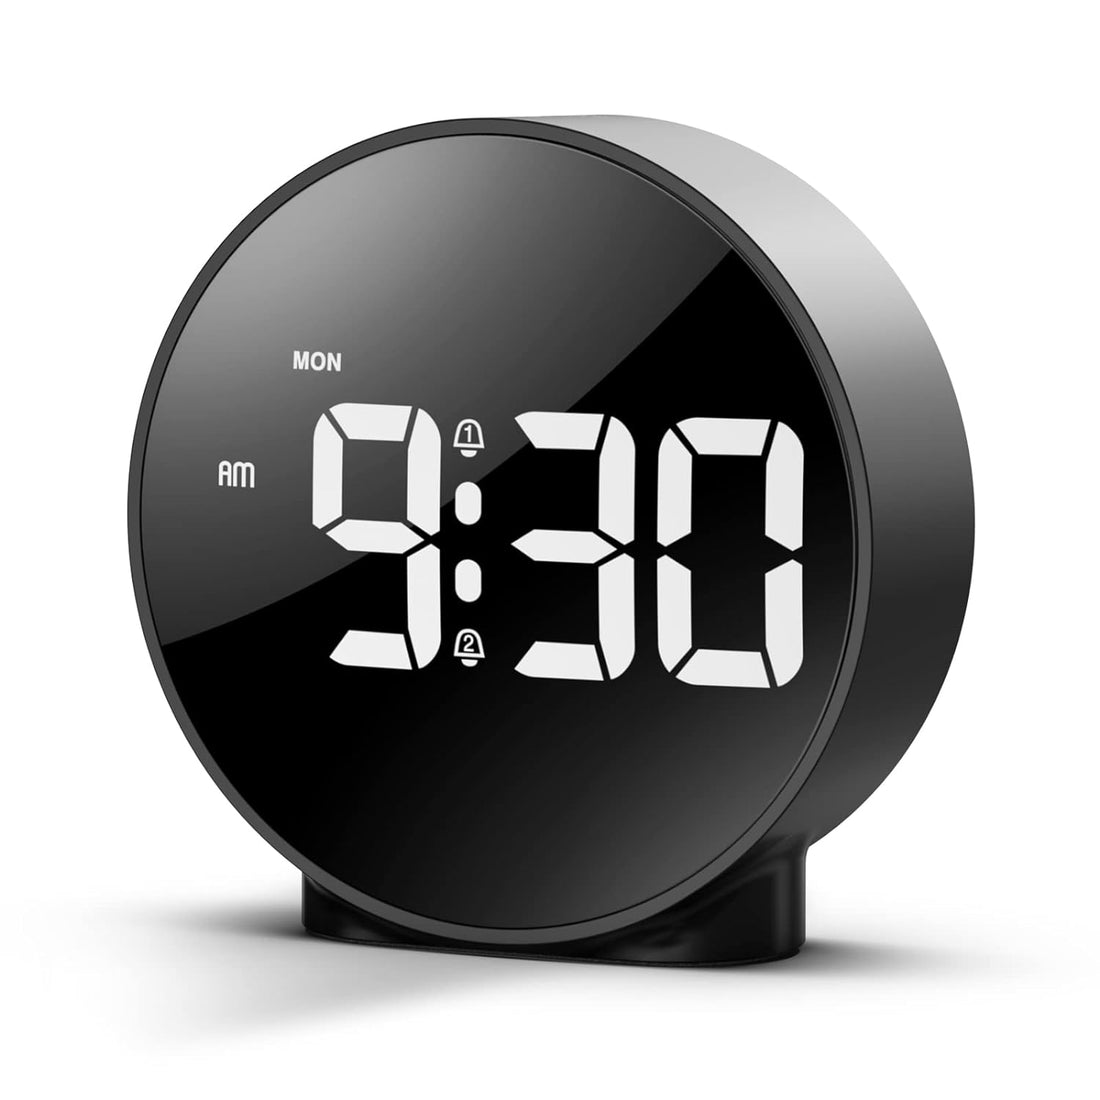 AMIR Digital Alarm Clock, New LED Clock, Small Electronic Clock with 2 Alarms, Snooze, Dimmable Alarm Days Set 12/24H Display, Bedside Clock for Home (Battery / Adapter not Included)